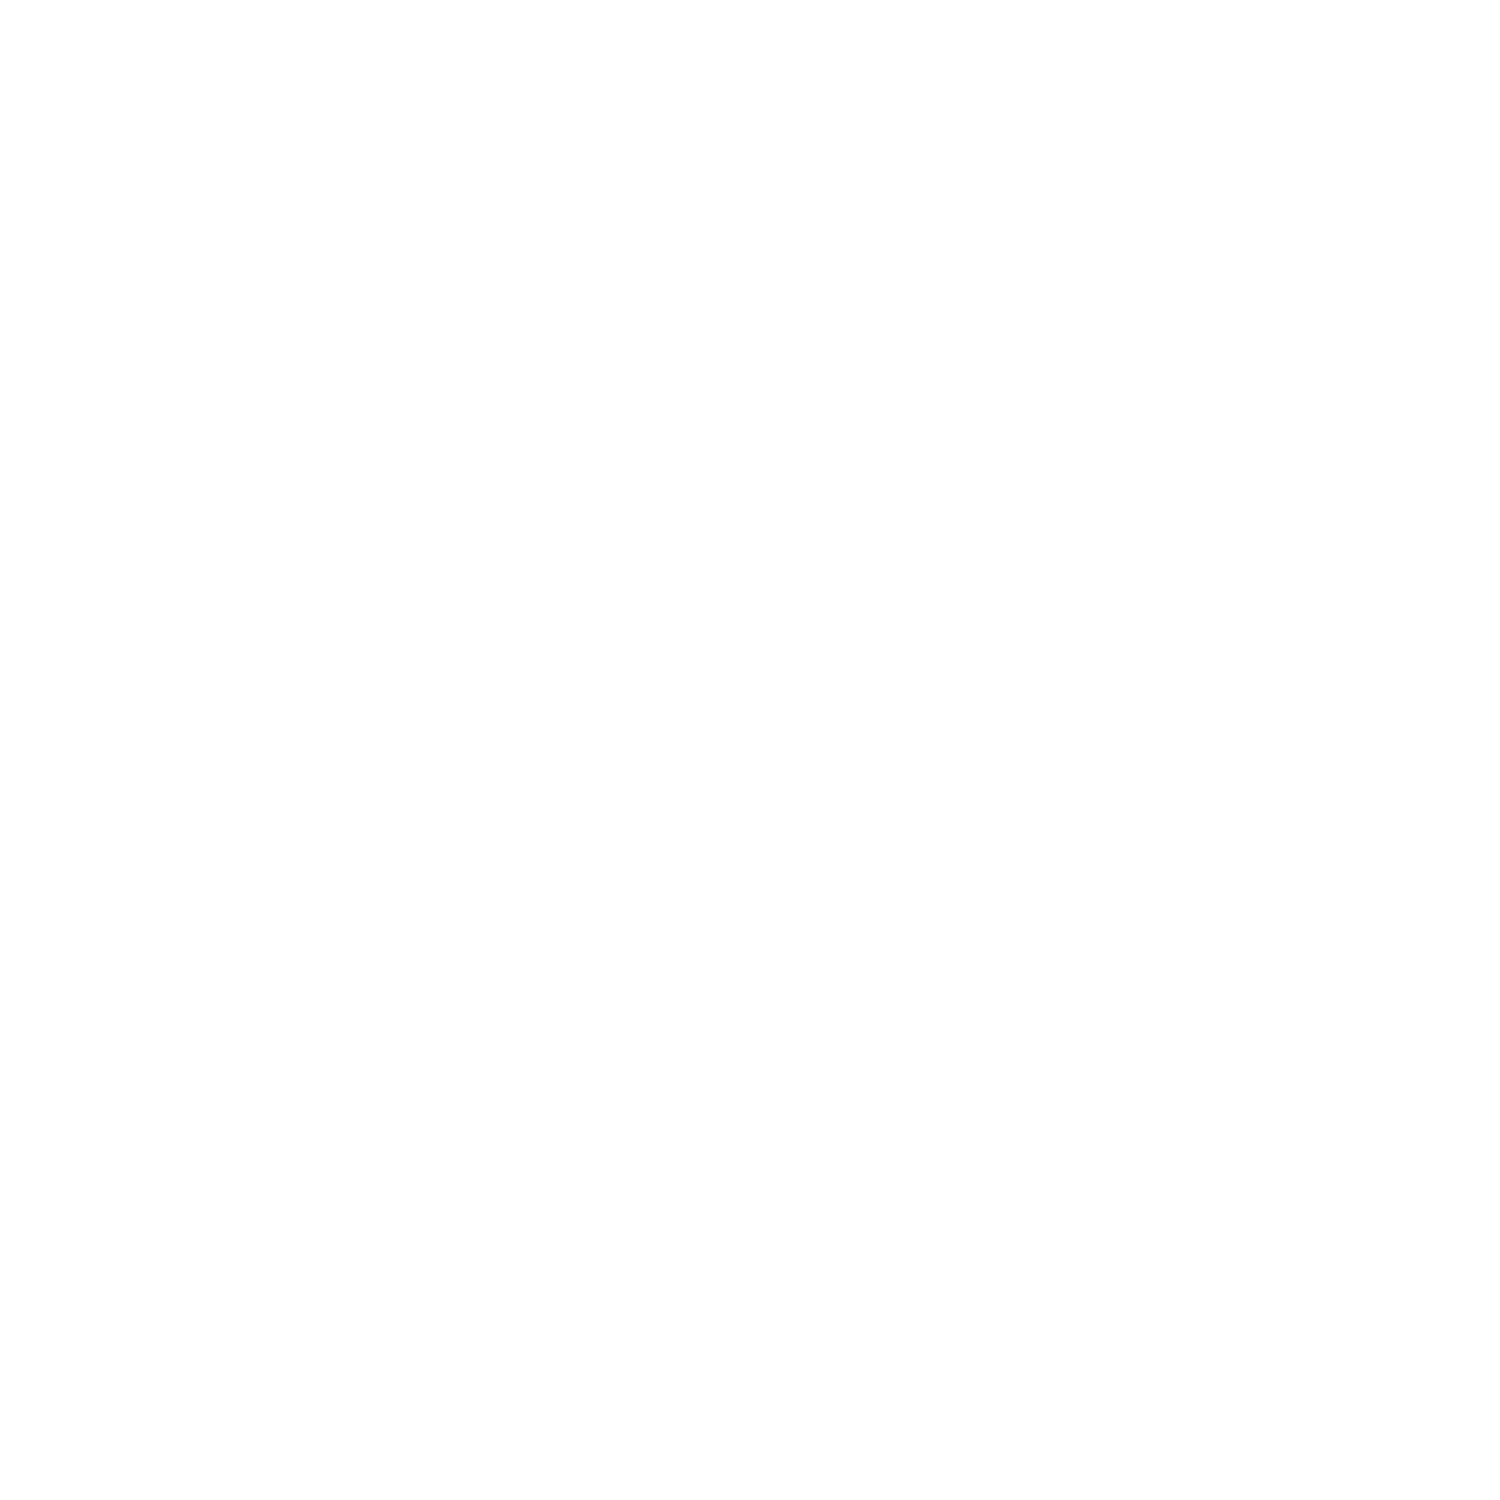 Investing Education Academy